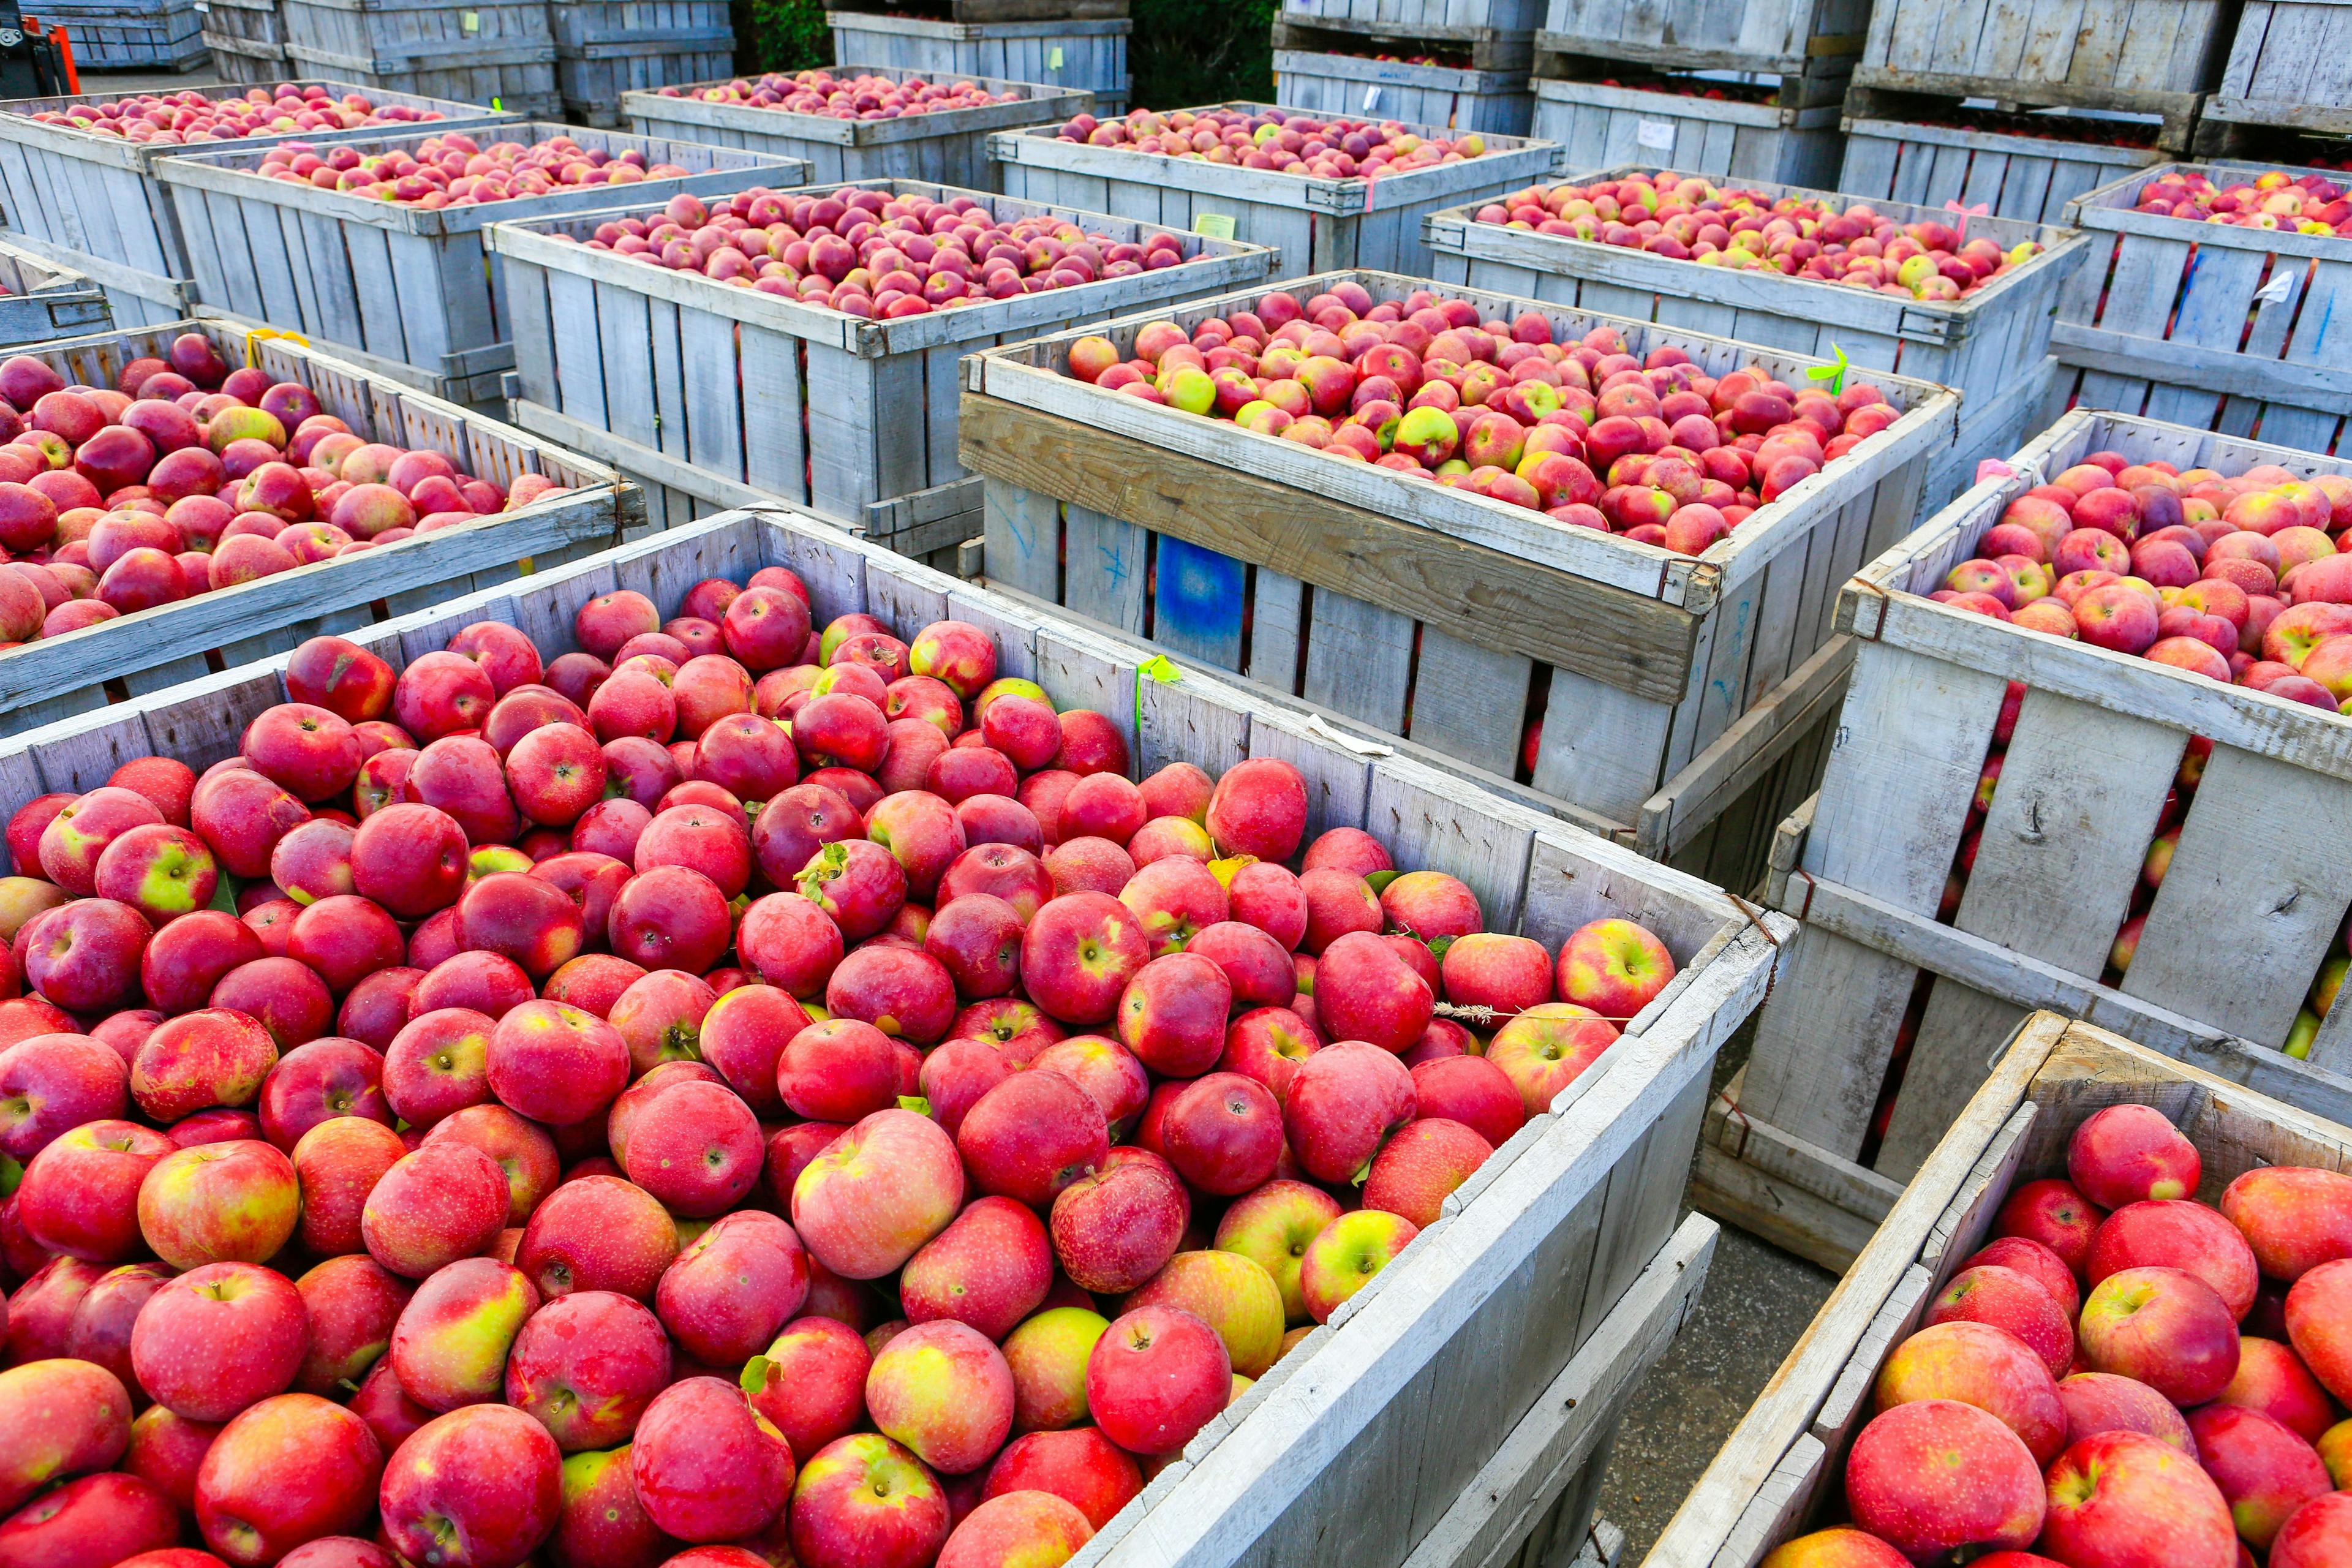 Wooden crates full of ripe apples during the annual harvesting period | Image Credit: © Iriana Shiyan - stock.adobe.com.